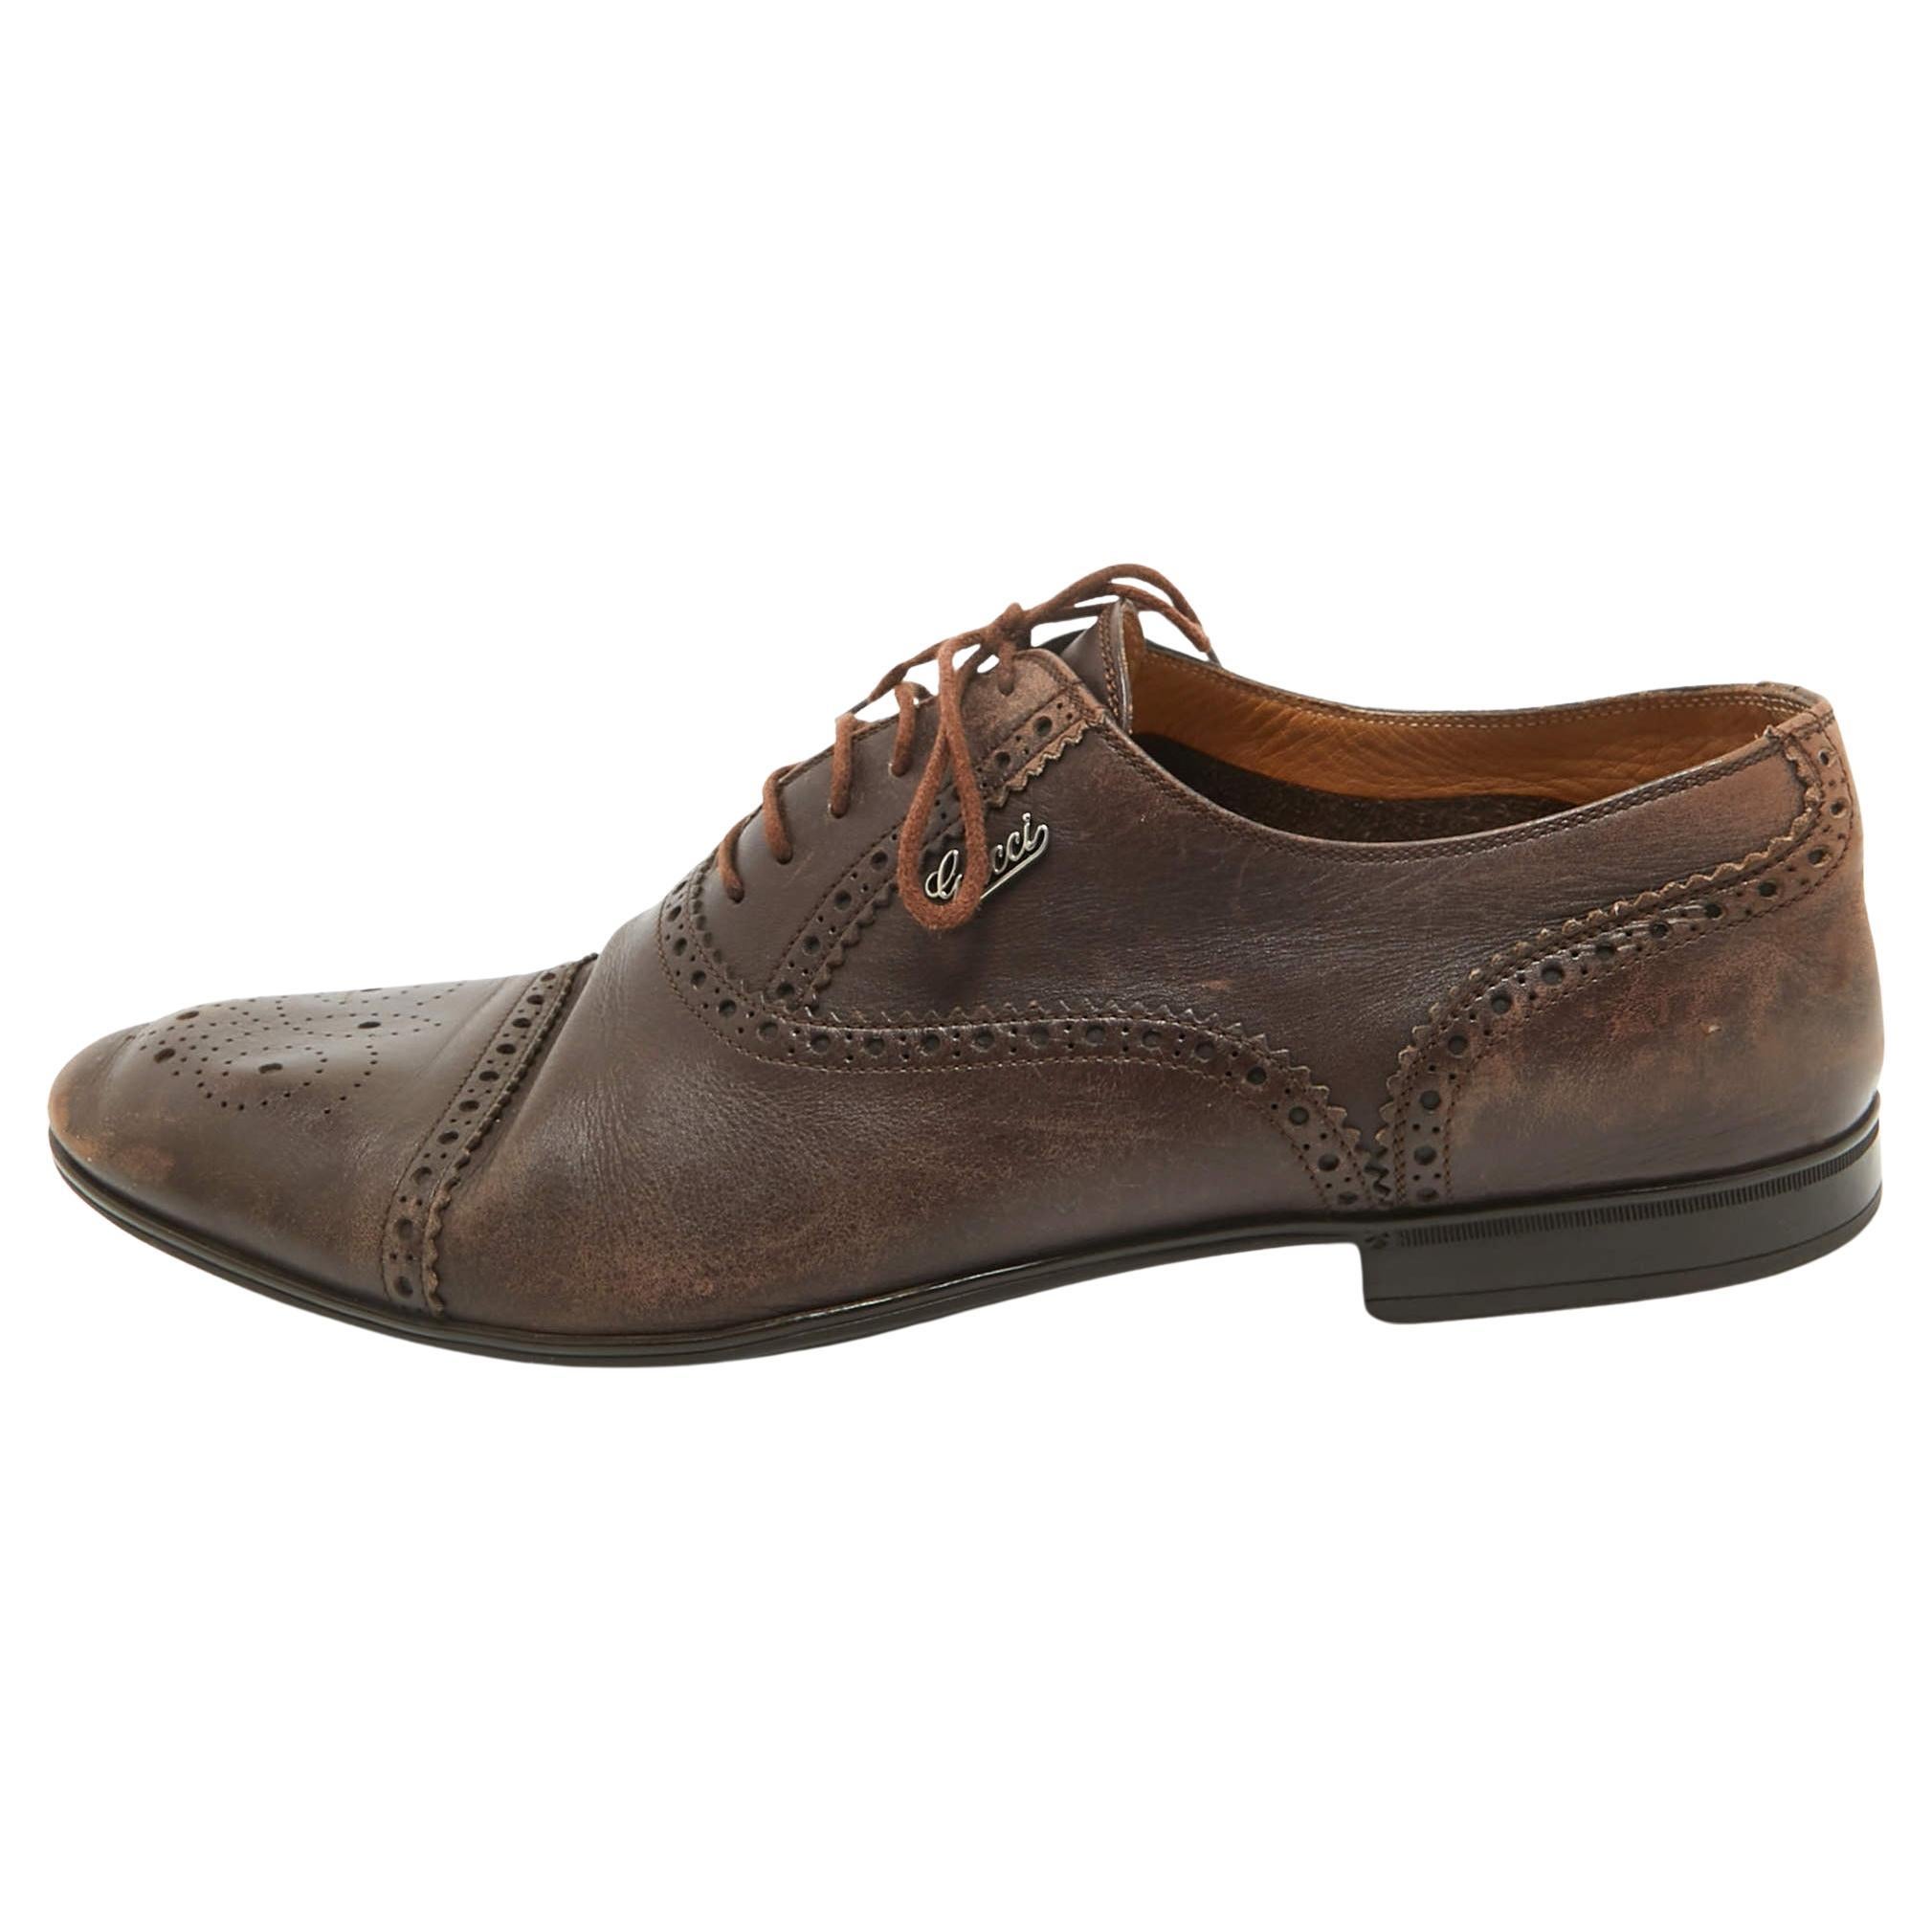 Gucci Brown Leather Lace Up Brogue Oxfords Size 44.5 For Sale